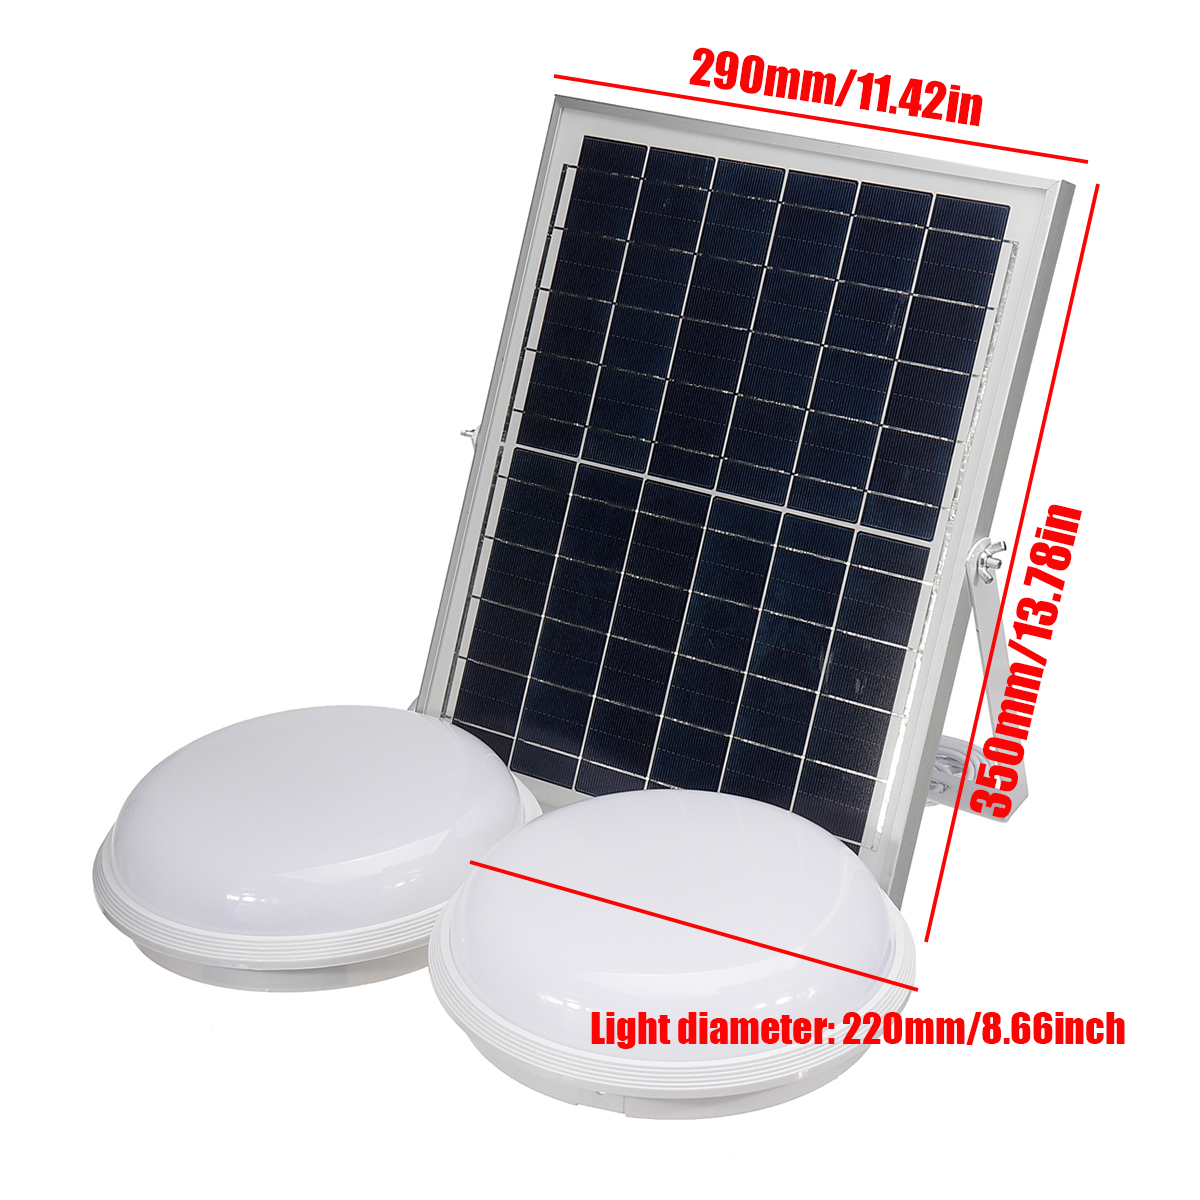 2-PCS-50W-Solar-Ceiling-Light-Remote-Control--Light-ControlTiming-Indoor-Solar-Light-100-Lamp-Beads--1935916-11